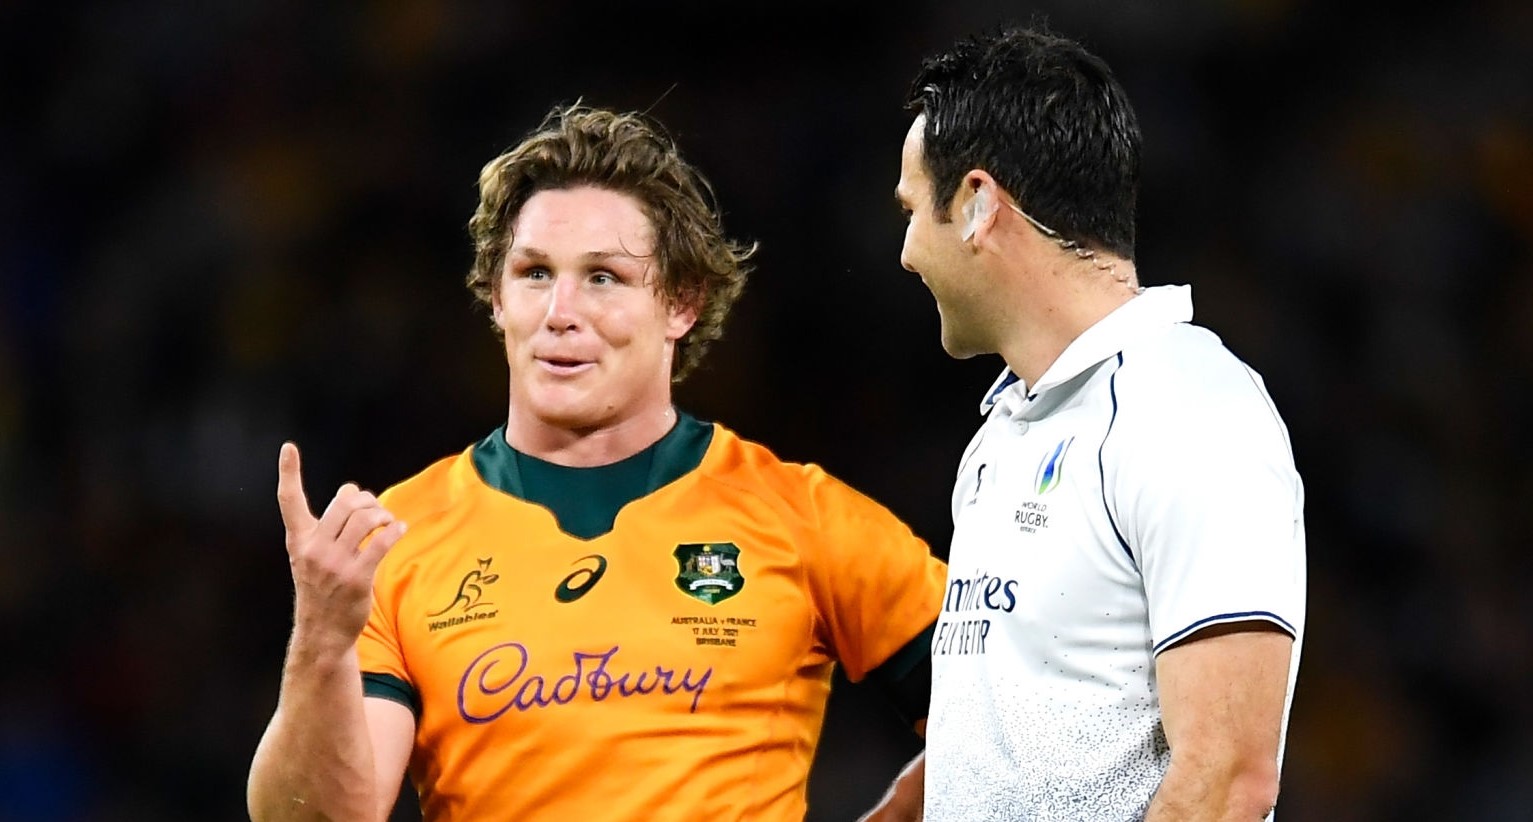 BRISBANE, AUSTRALIA - JULY 17: Michael Hooper of the Wallabies speaks to referee Ben O’Keeffe during the International Test Match between the Australian Wallabies and France at Suncorp Stadium on July 17, 2021 in Brisbane, Australia. (Photo by Albert Perez/Getty Images)